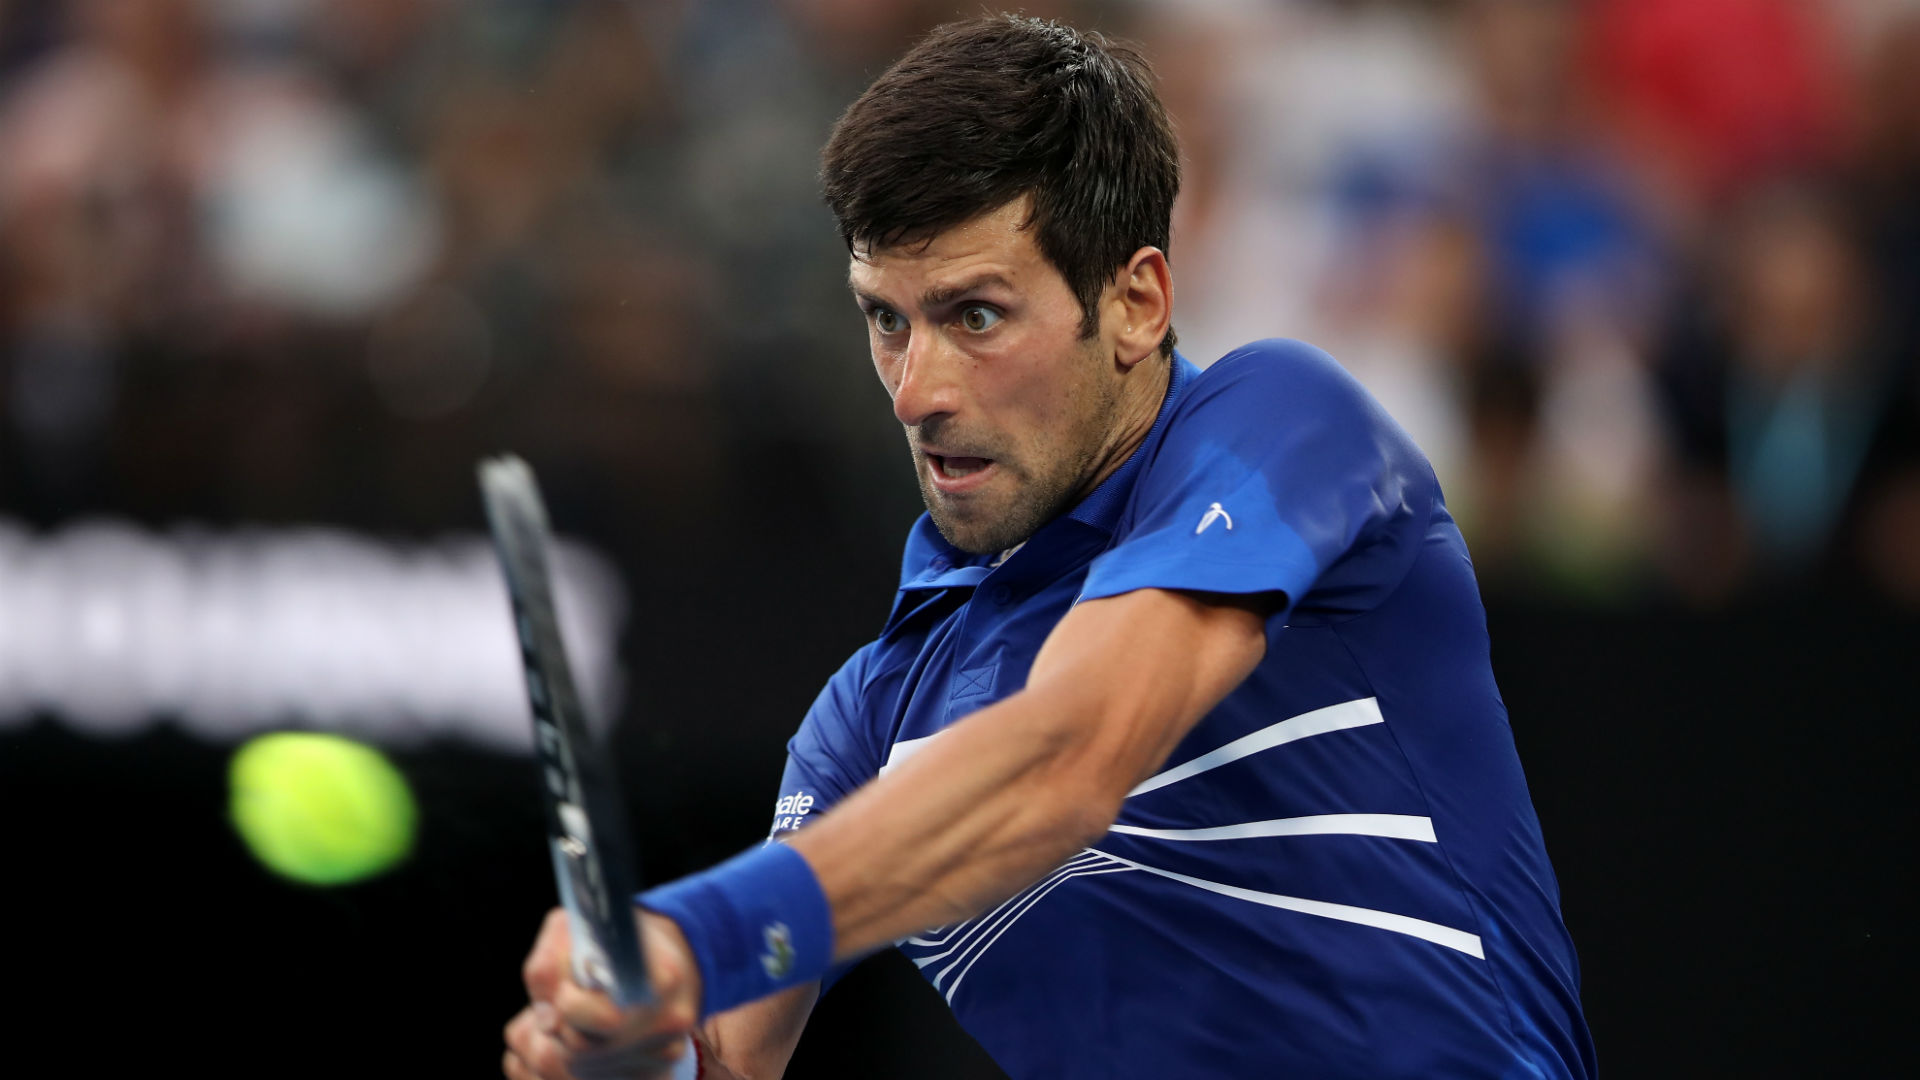 Novak Djokovic started his quest to win a third consecutive major title with a comfortable victory over the 231-ranked Mitchell Krueger